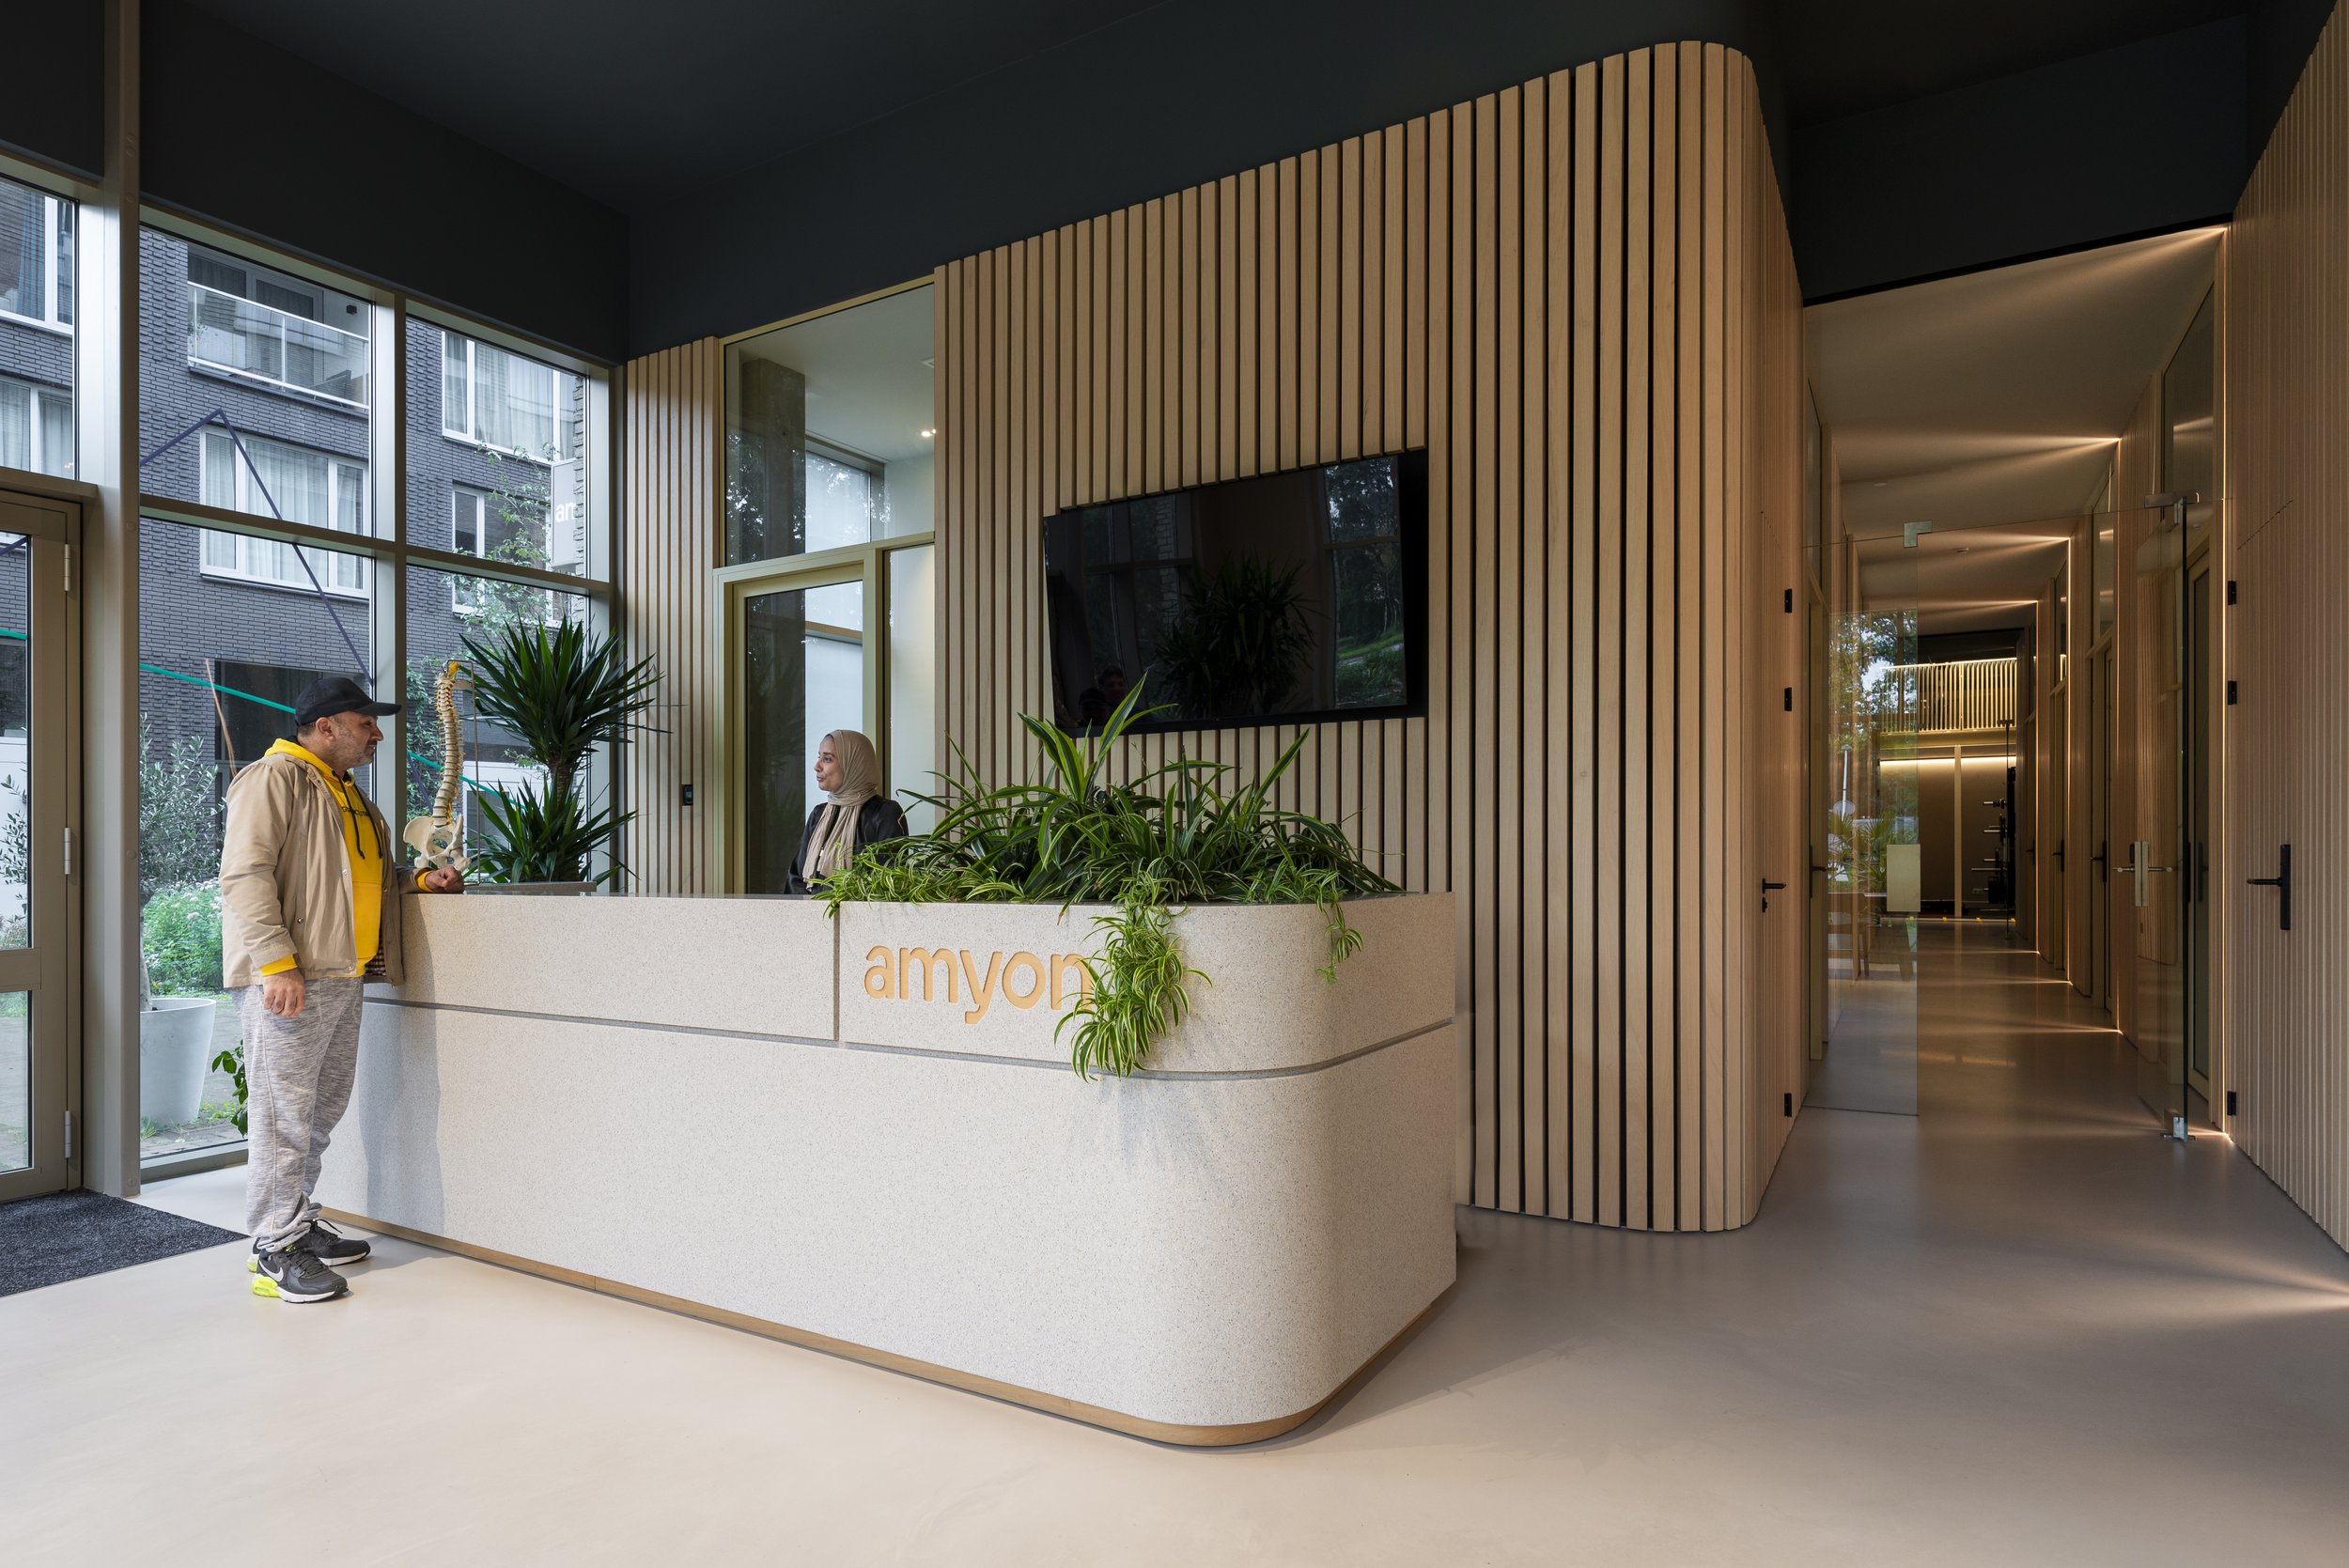   physiotherapy practice Amyon   design of a luxurious physiotherapy practice in Utrecht 